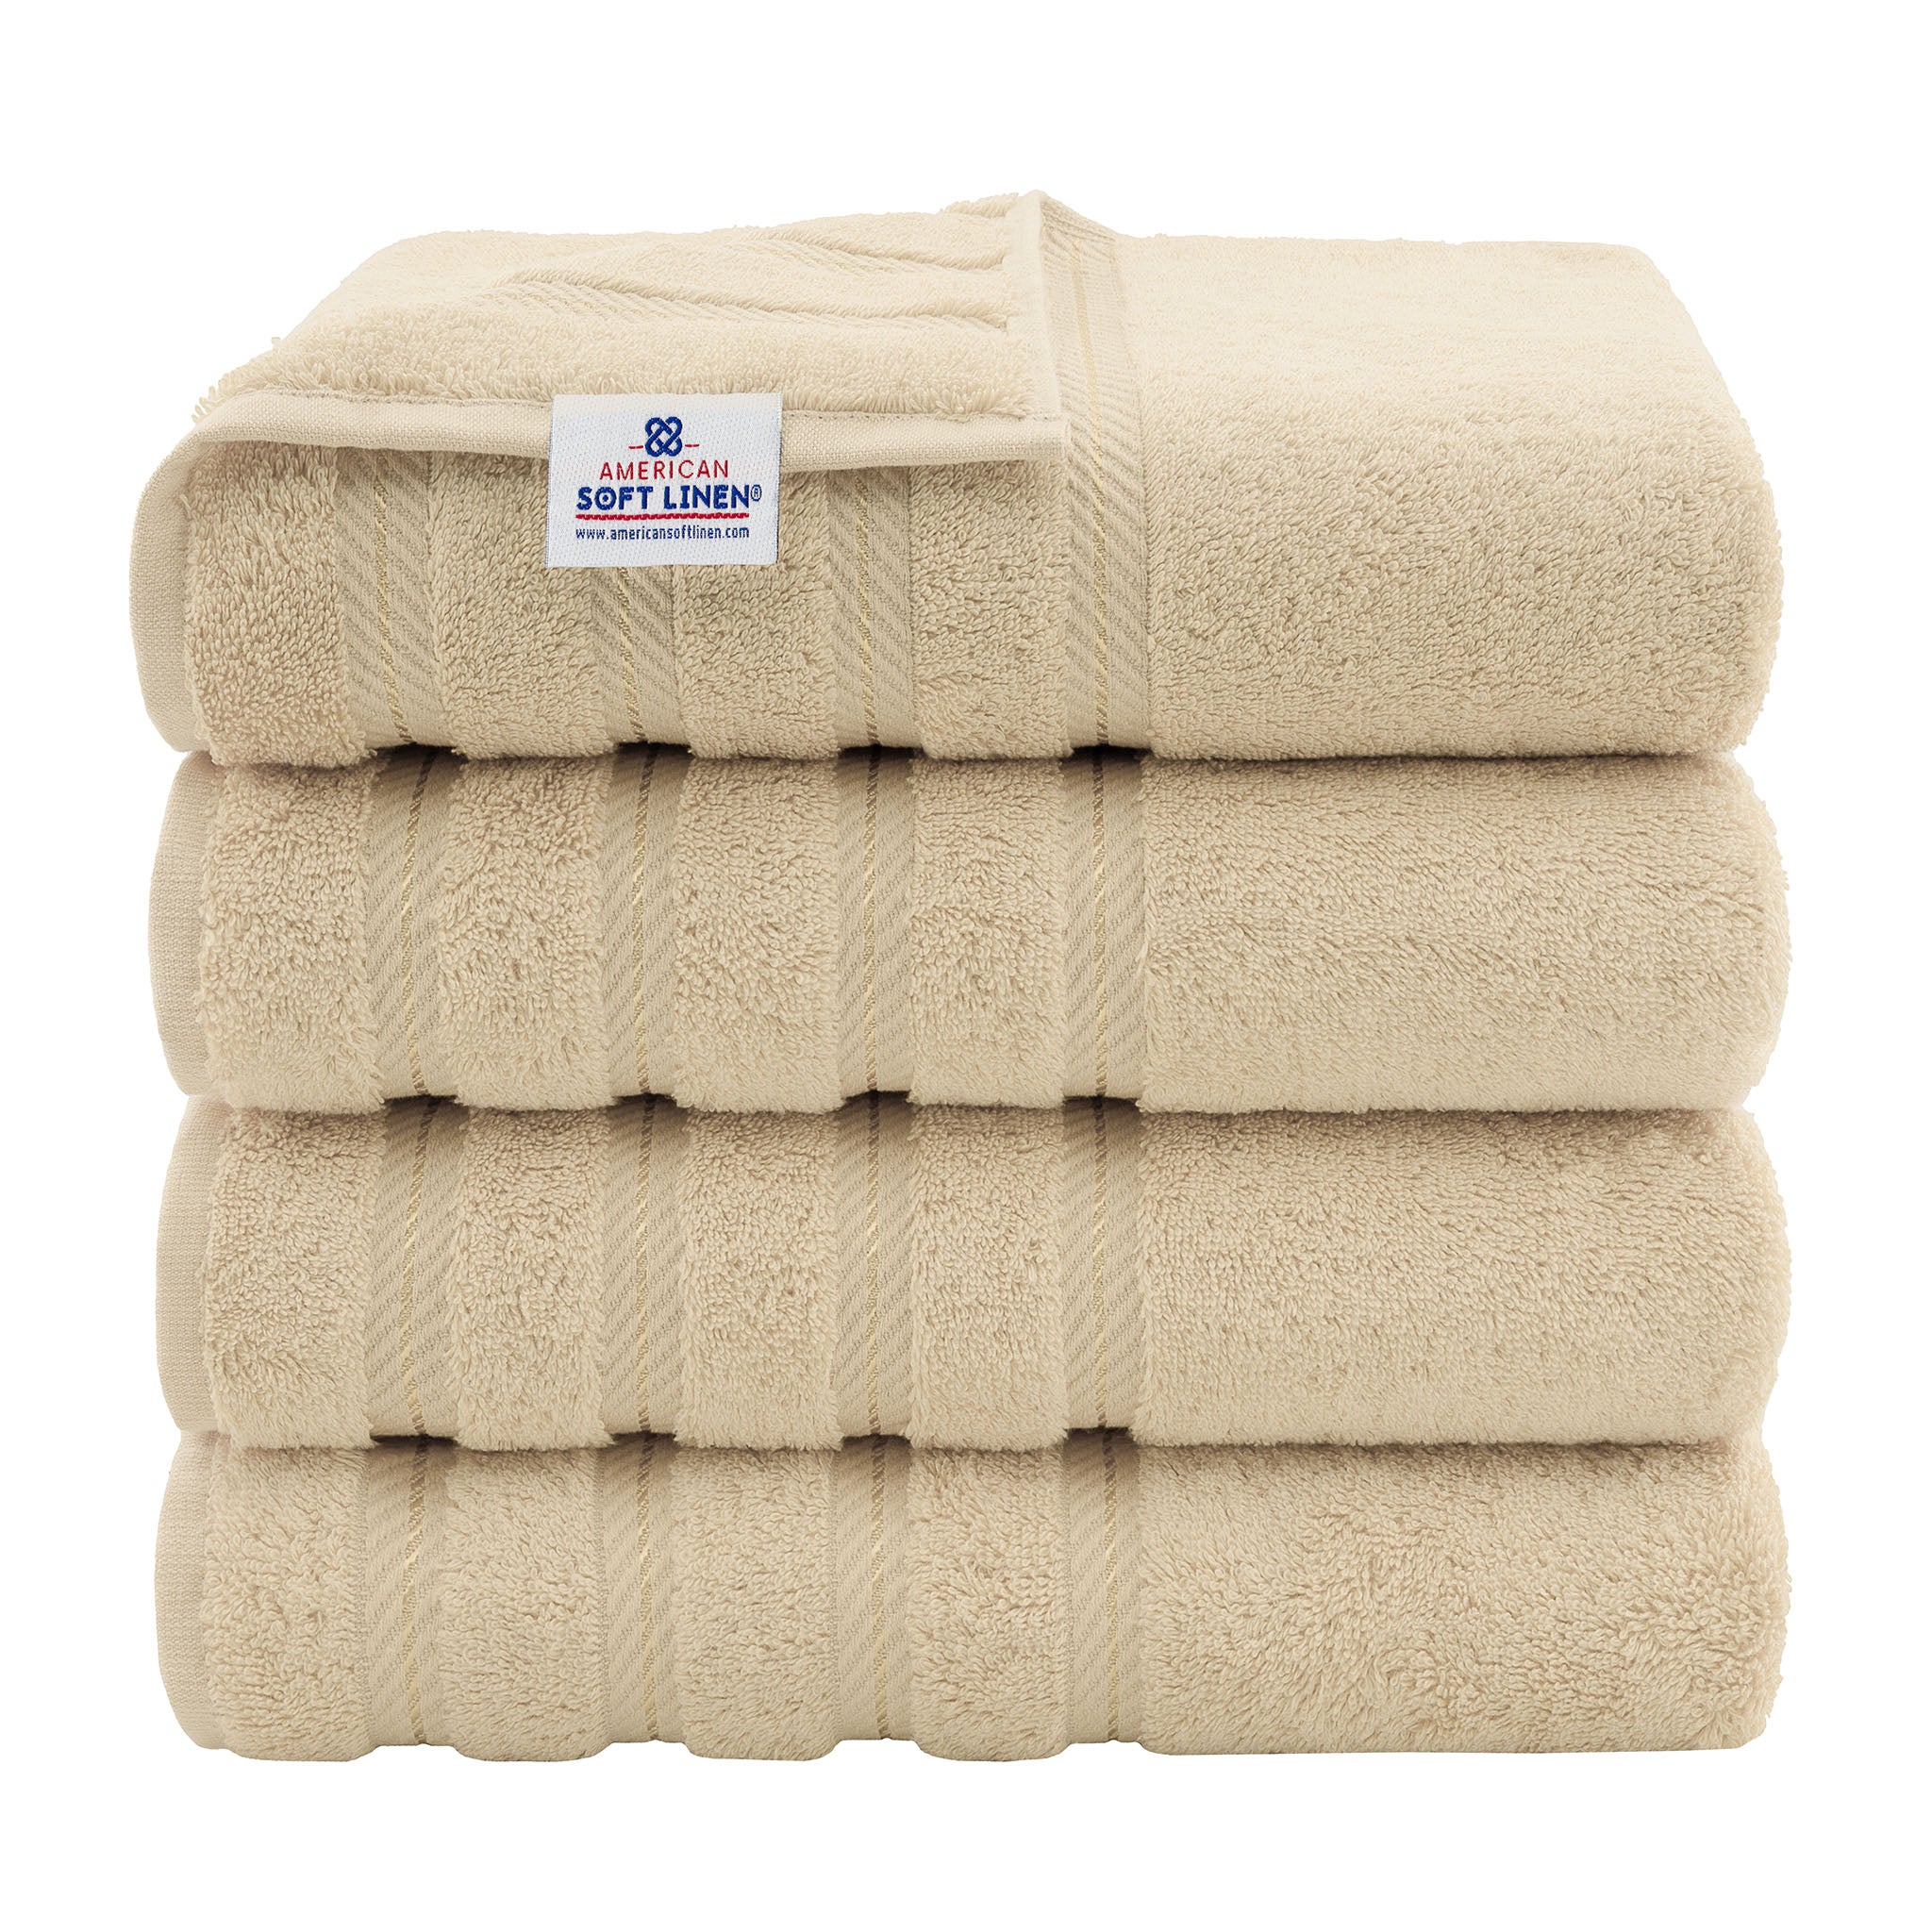 Bekata Extra Large Premium Bath Towels Set 100% Cotton Towels for Hotel and  Spa, Maximum Softness and Absorbency (4 Pack, White) Turkish Cotton Bath